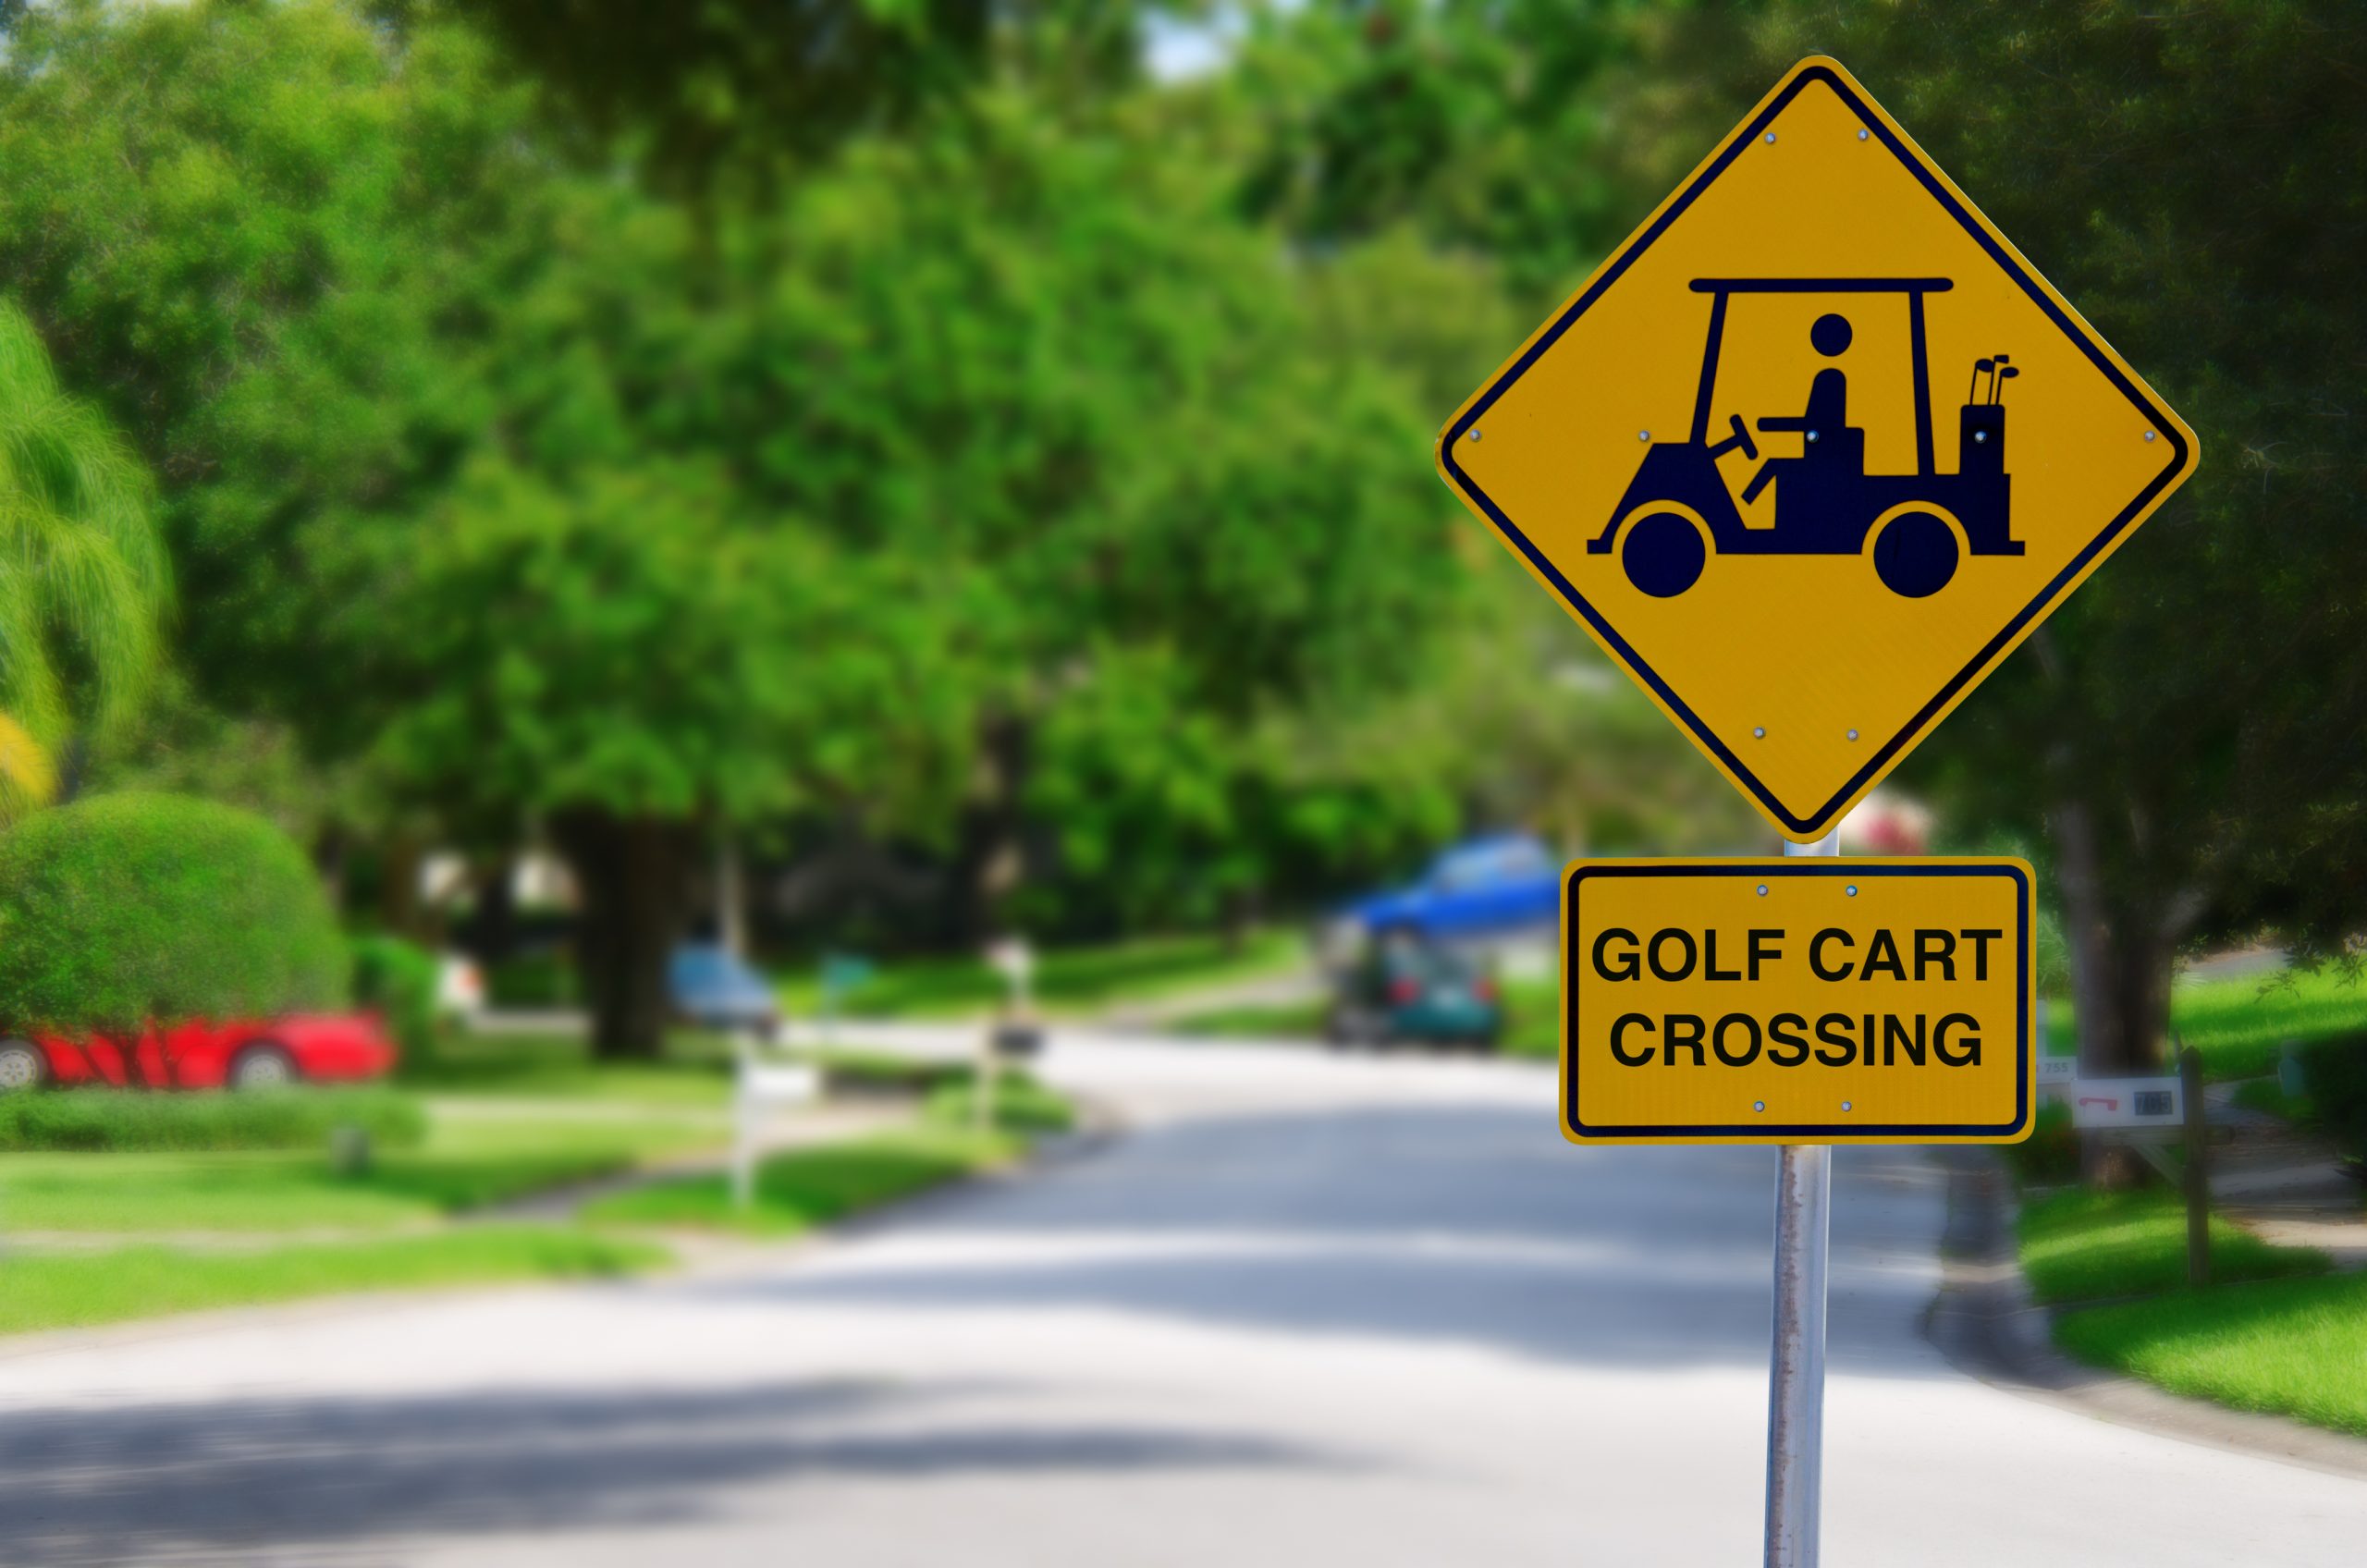 Florida Golf Cart Accident Lawsuit Alleges Car Driver Negligence — Florida Personal Injury Lawyer Blog — May 20, 2022